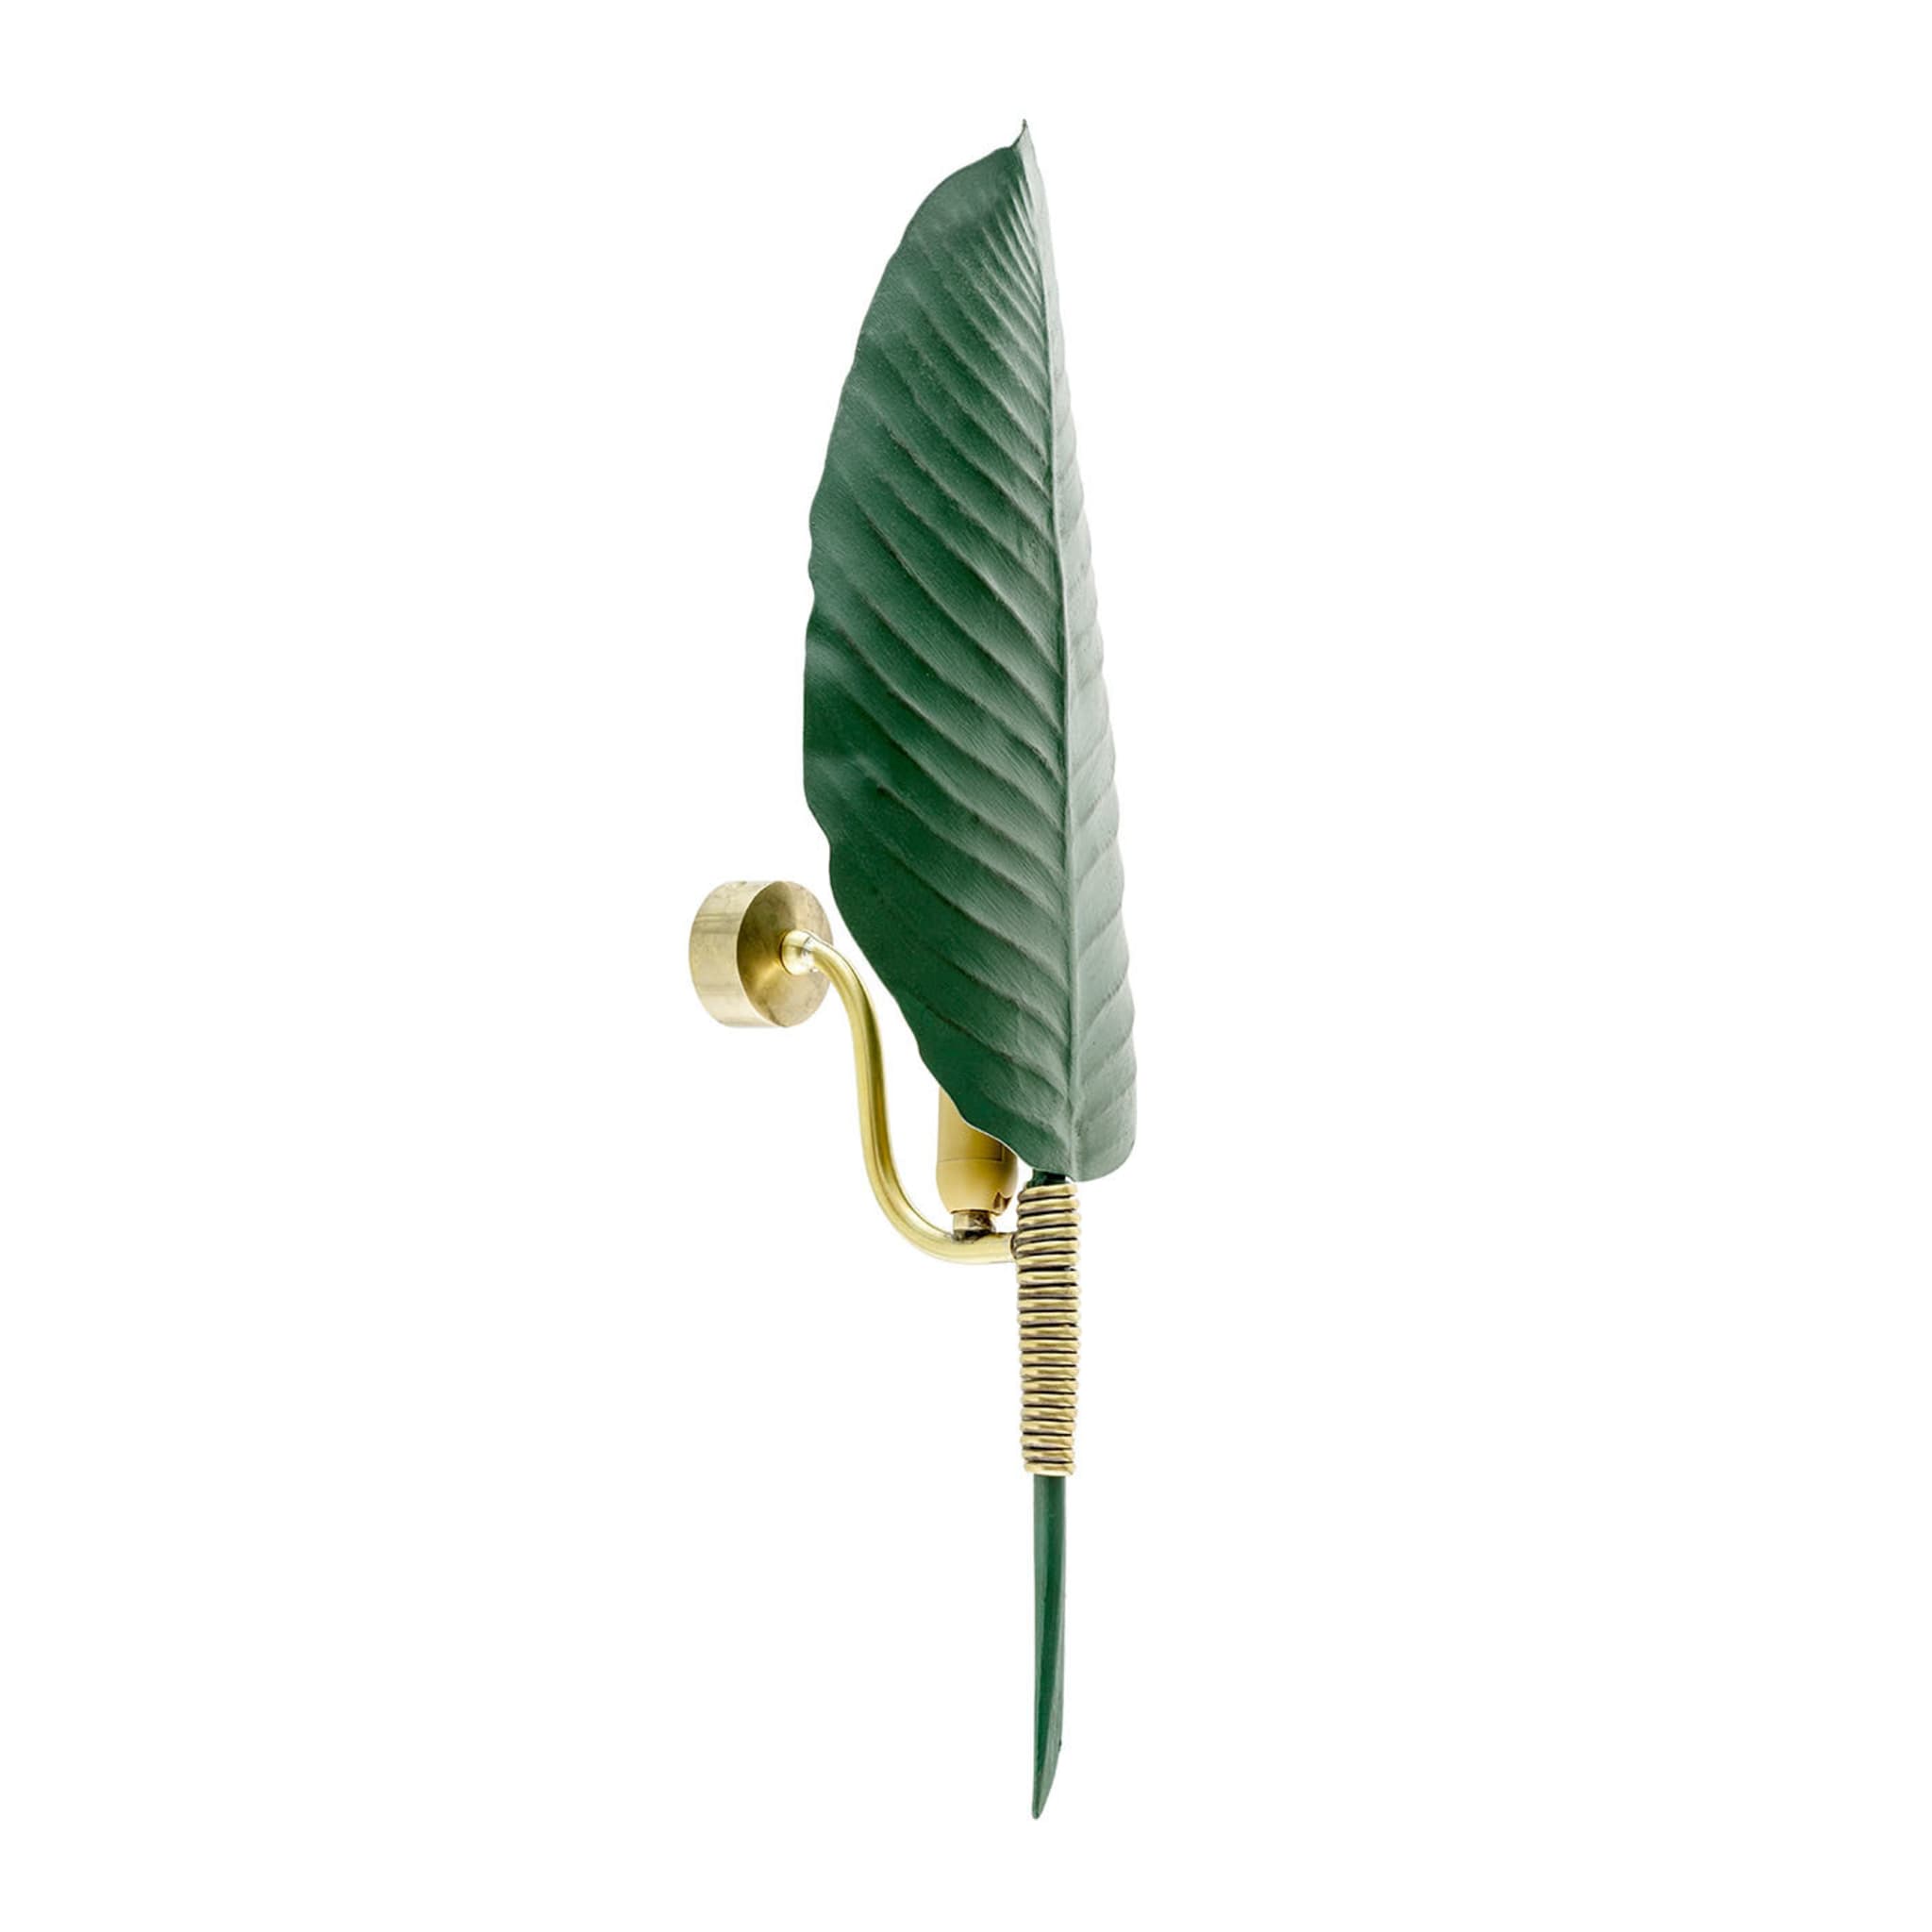 Hortus Heliconia Leaf Sconce - Alternative view 1